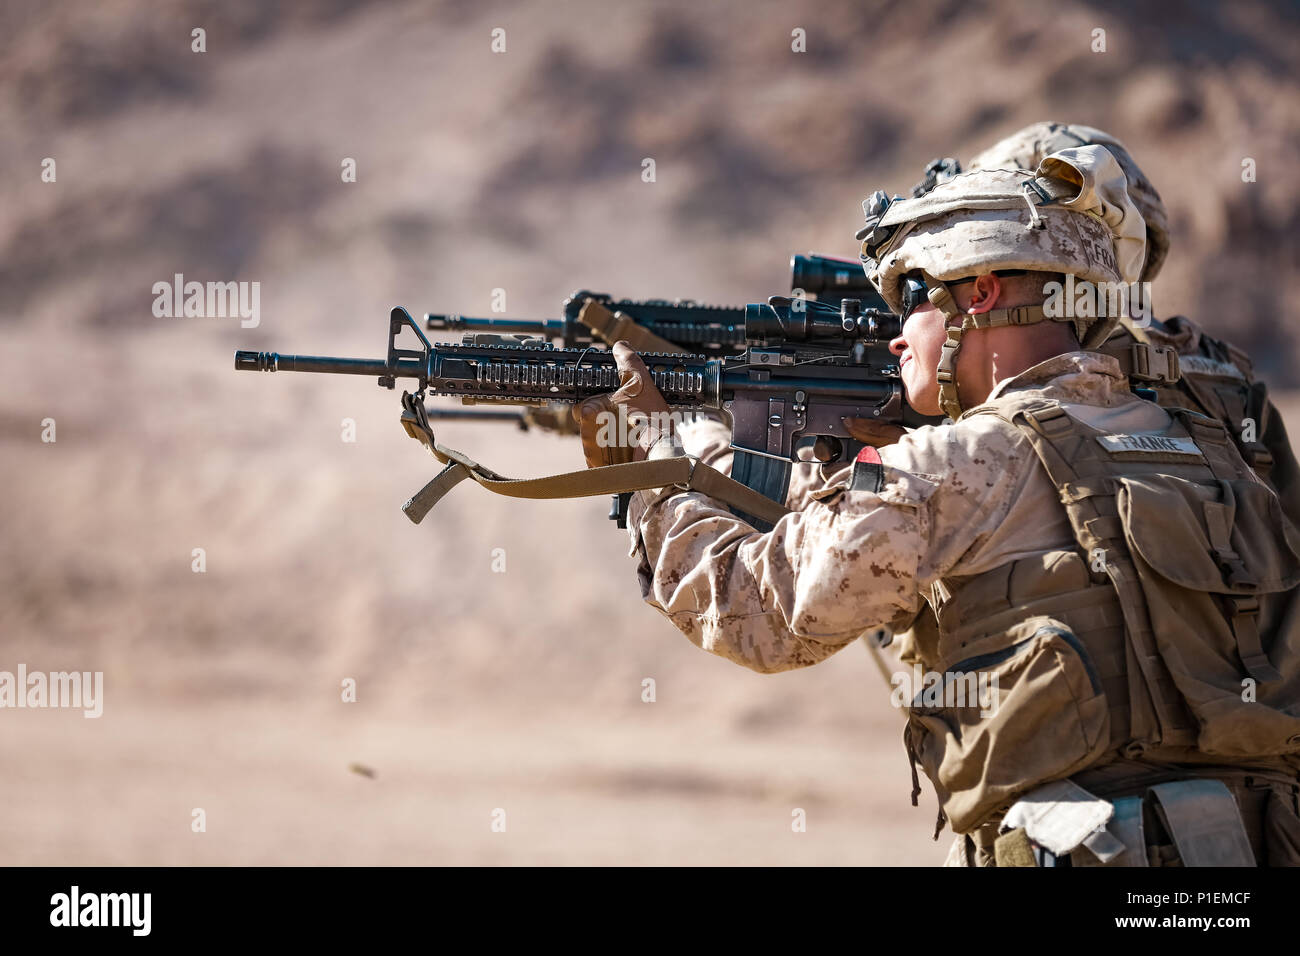 A U.S. Marine with weapons platoon, Fox Company, 2nd Battalion, 7th Marine Regiment, Special Purpose Marine Air - Ground Task Force - Crisis Response - Central Command, shoots his M16 rifle during a live - fire range during Mission Rehearsal Exercise 2016 near the southern border of the Hashemite Kingdom of Jordan,  Sept. 11, 2016. The MRX is a collective training event where the MAGTF elements collaborate to refine individual and cooperative capabilities. SPMAGTF - CR – CC is a self-sustaining expeditionary unit, designed to provide a broad range of crisis response capabilities throughout the Stock Photo